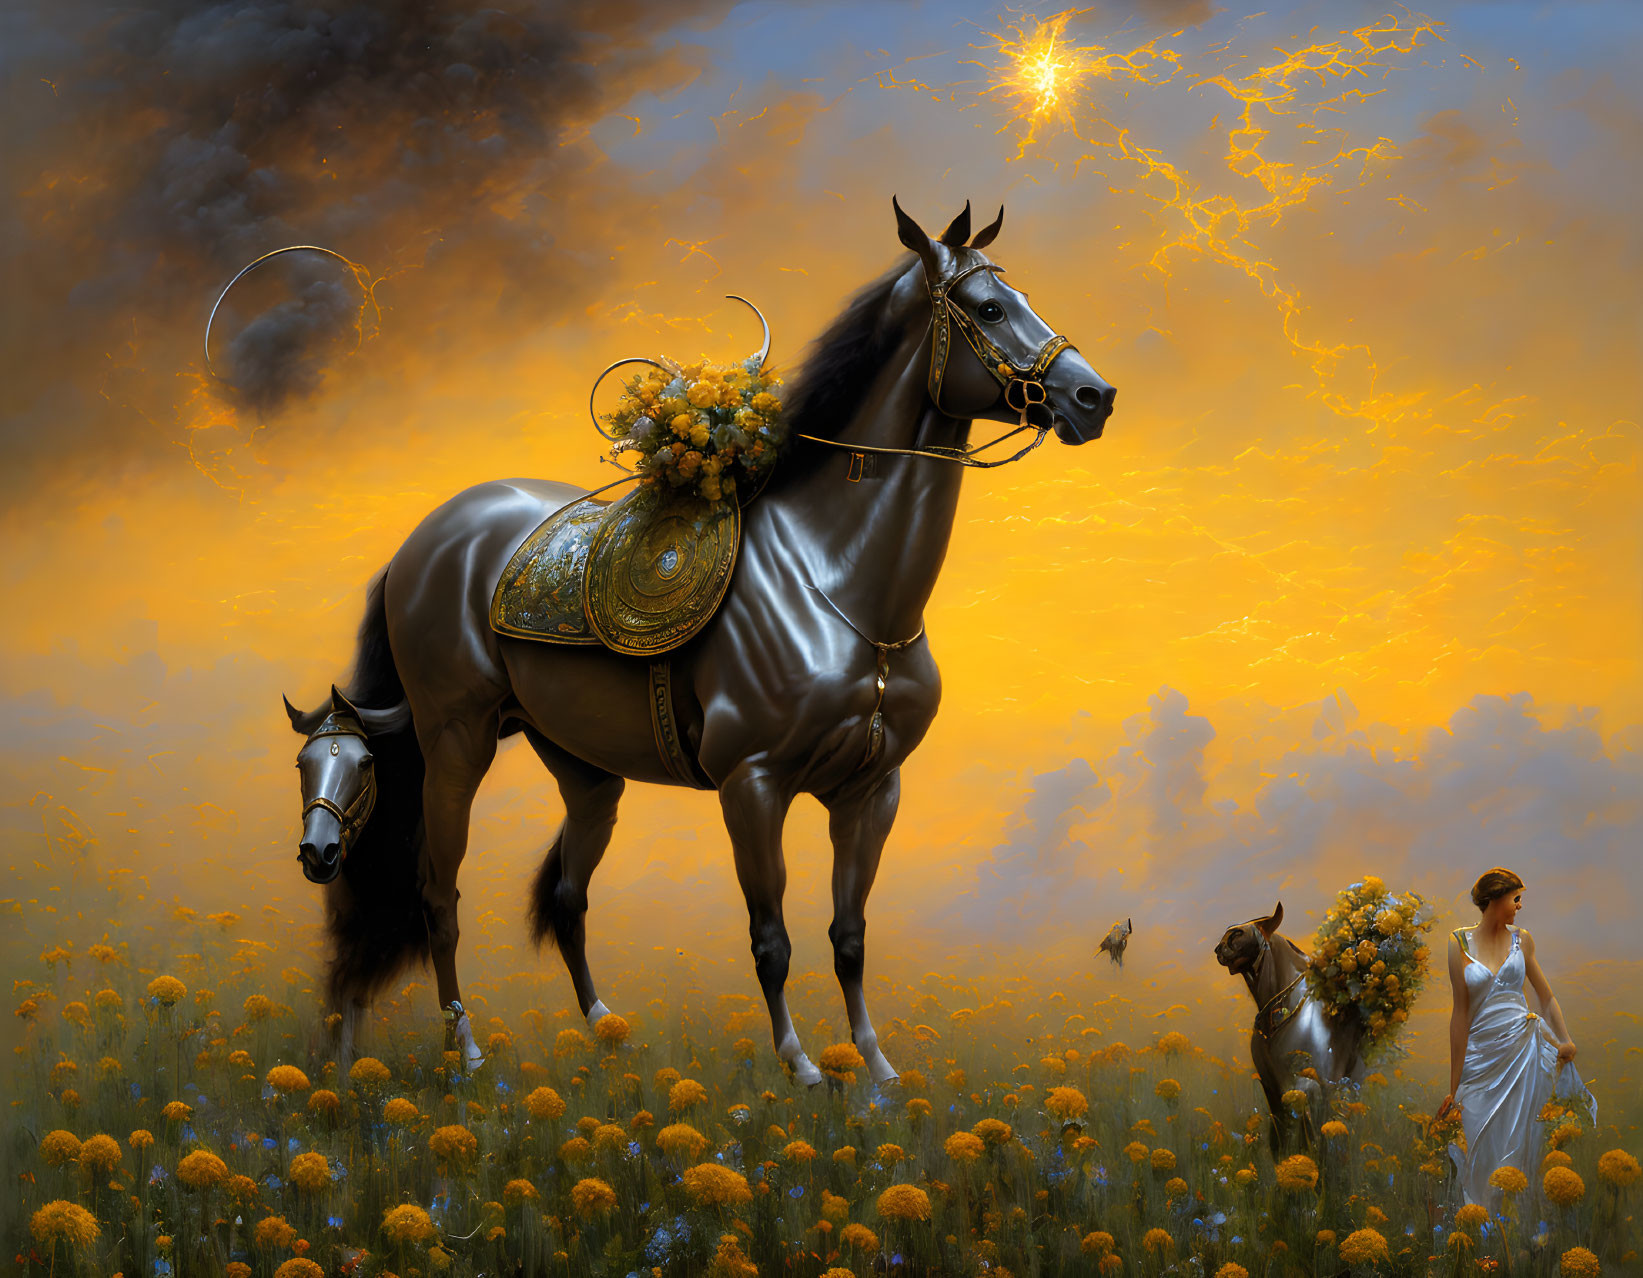 Dark horse with floral decorations in field of yellow flowers under orange sky.